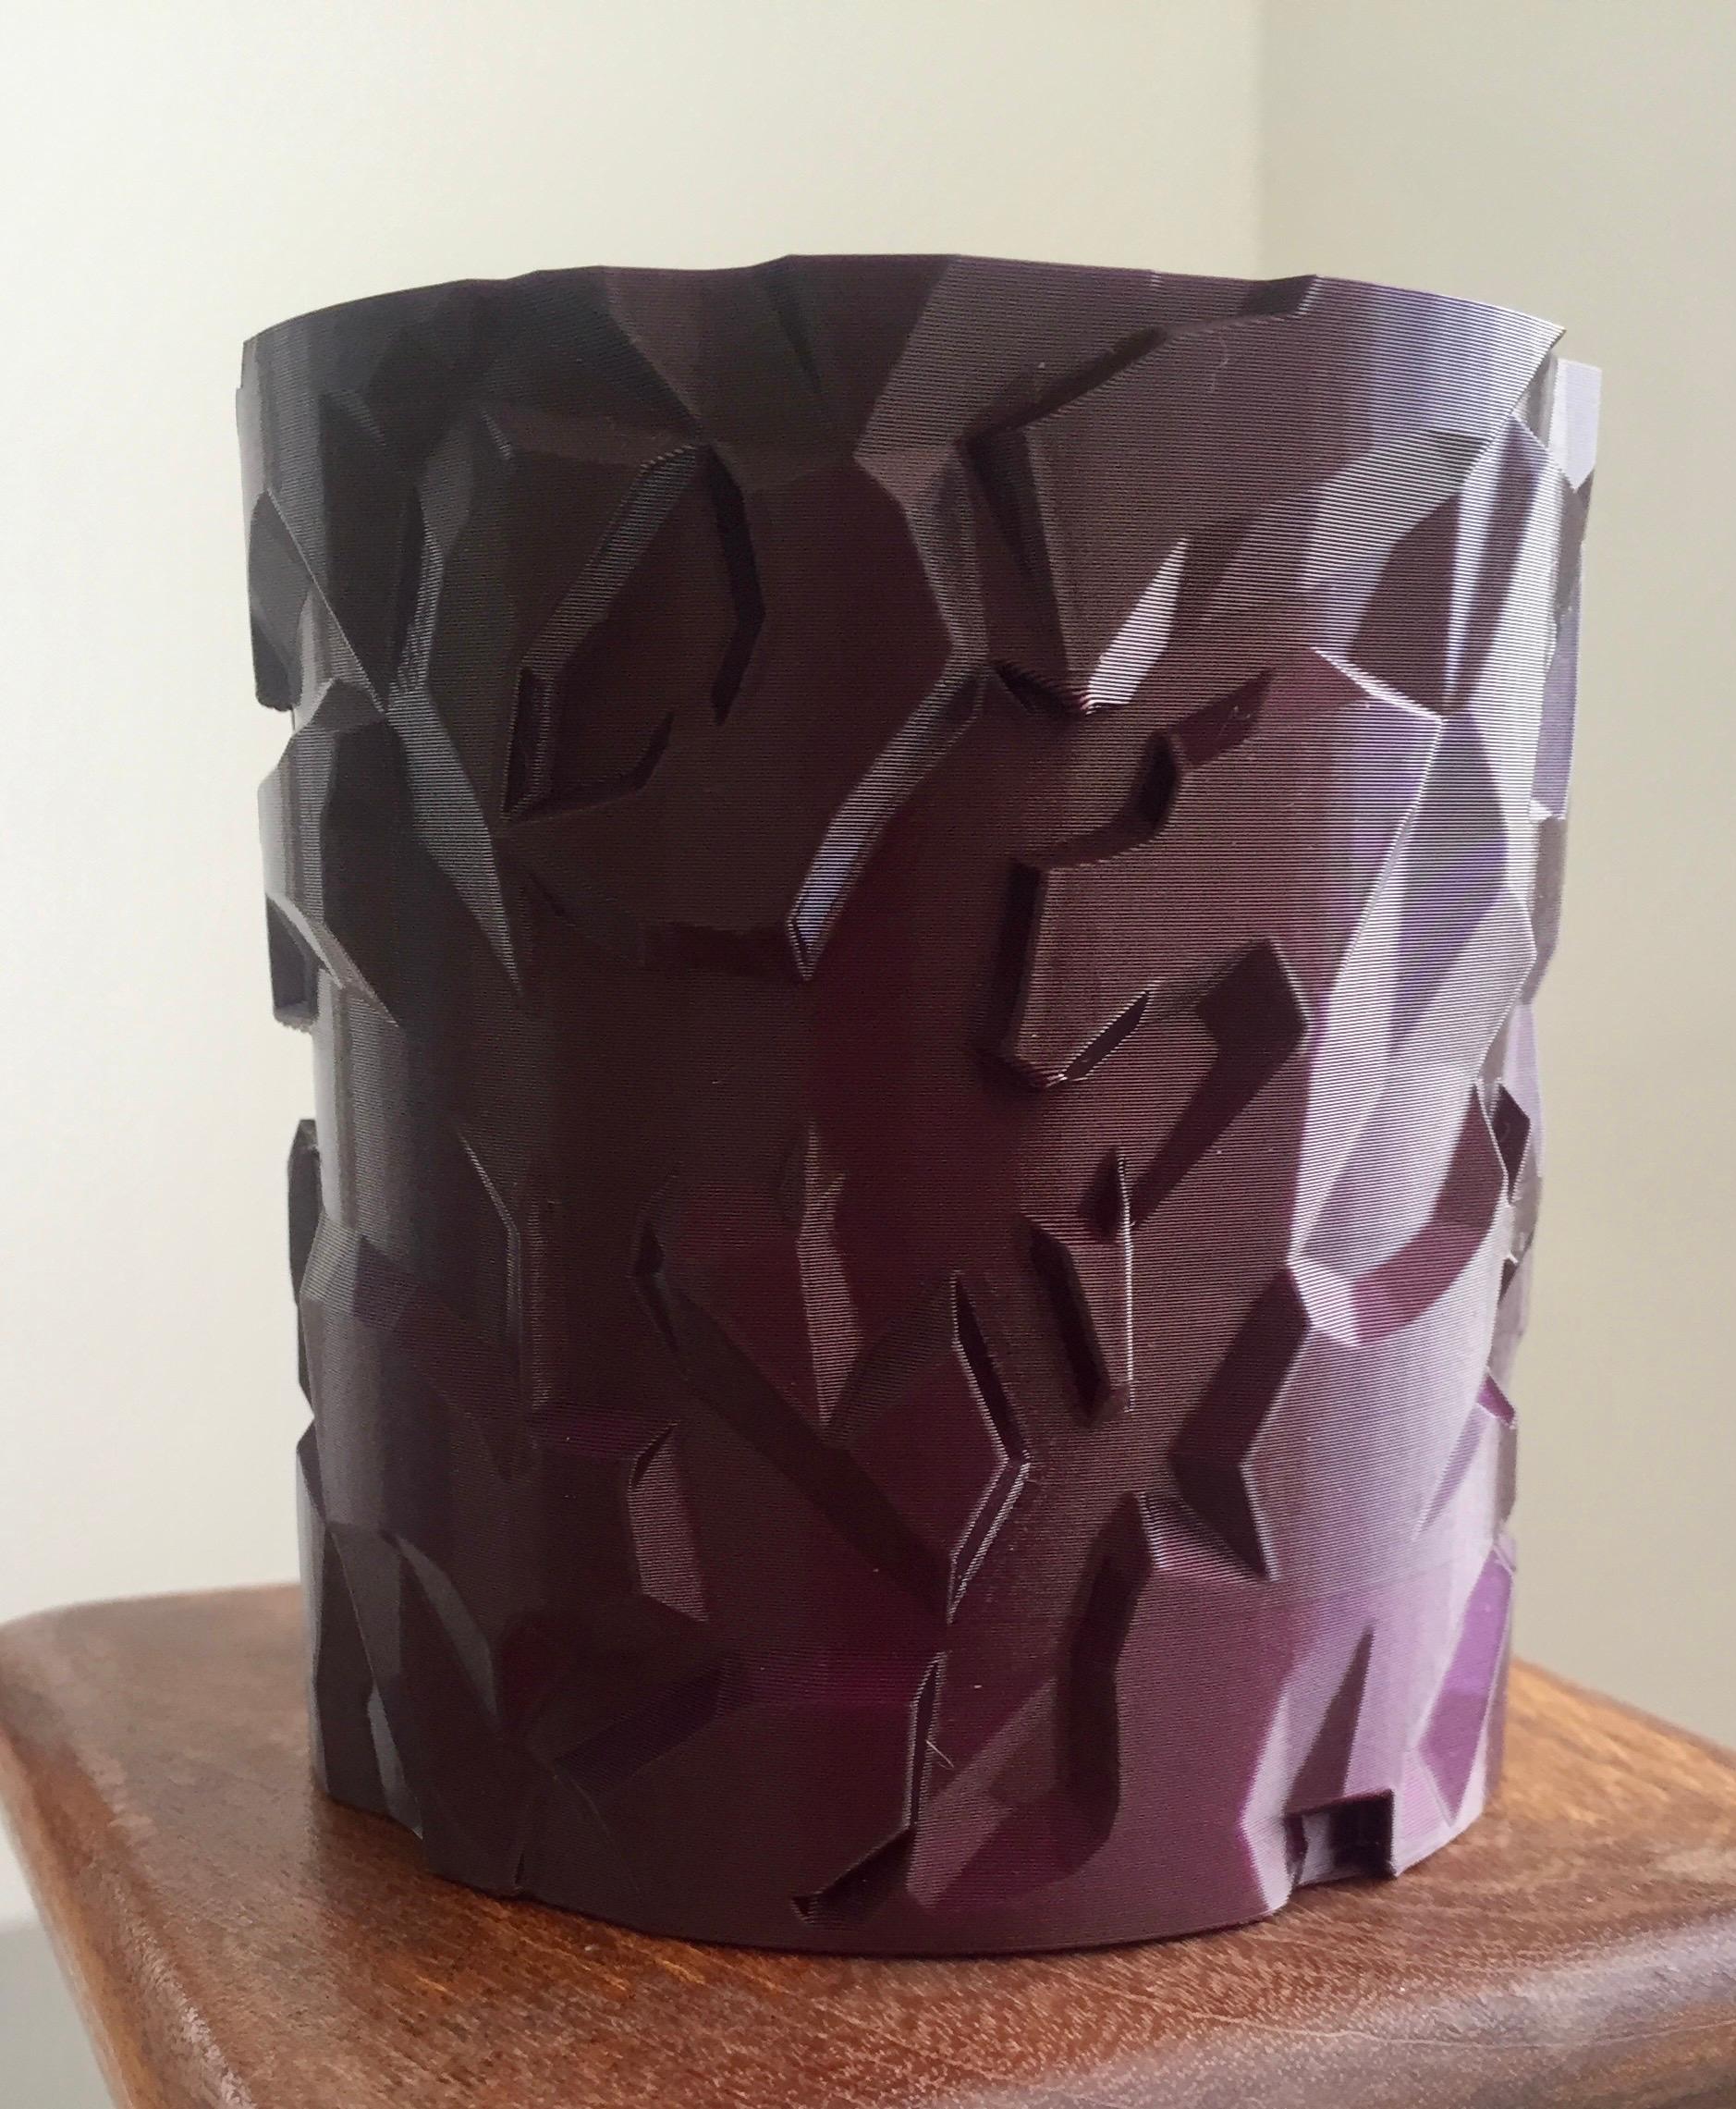 Rock Pot - This came out lovely with Prusament Mystic Brown PLA. There’s a narrow slit in the STL’s base and I filled that in with a generic cylinder in Prusa Slicer.
It’s a great model, thank you for sharing it! - 3d model